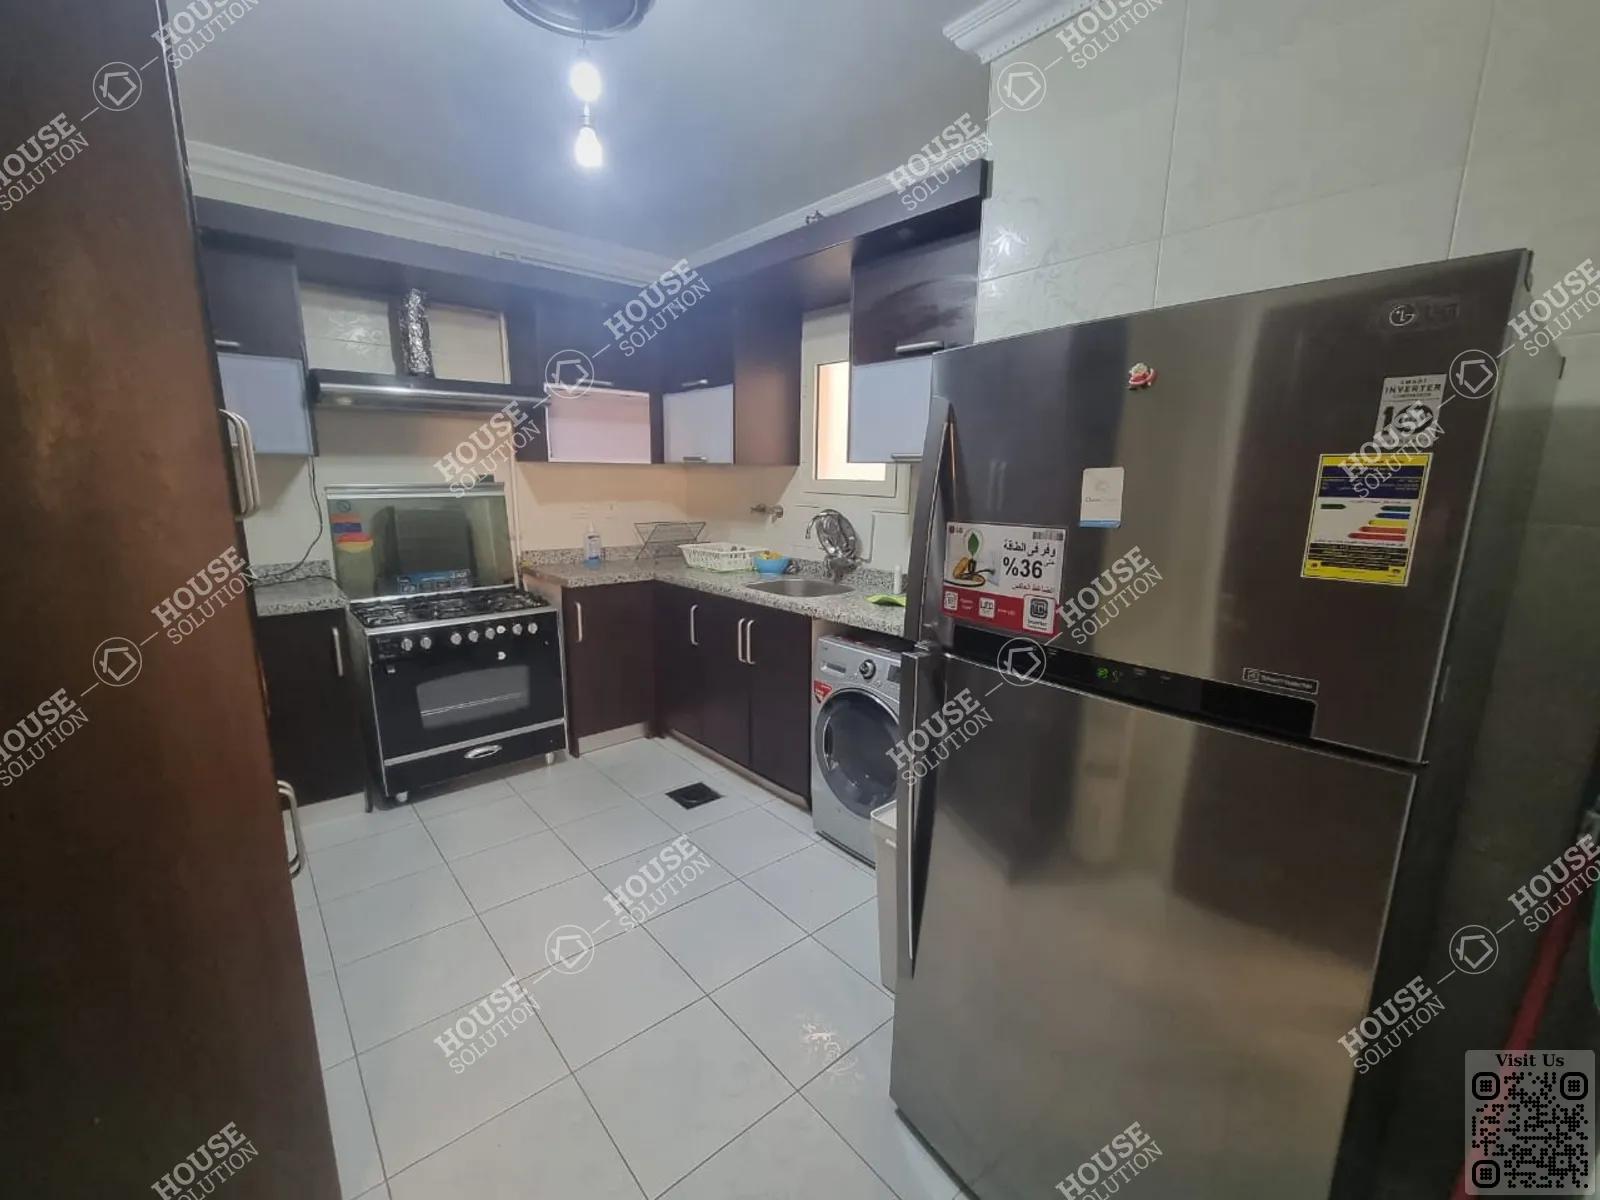 KITCHEN  @ Apartments For Rent In Maadi Maadi Sarayat Area: 180 m² consists of 3 Bedrooms 2 Bathrooms Modern furnished 5 stars #5410-1